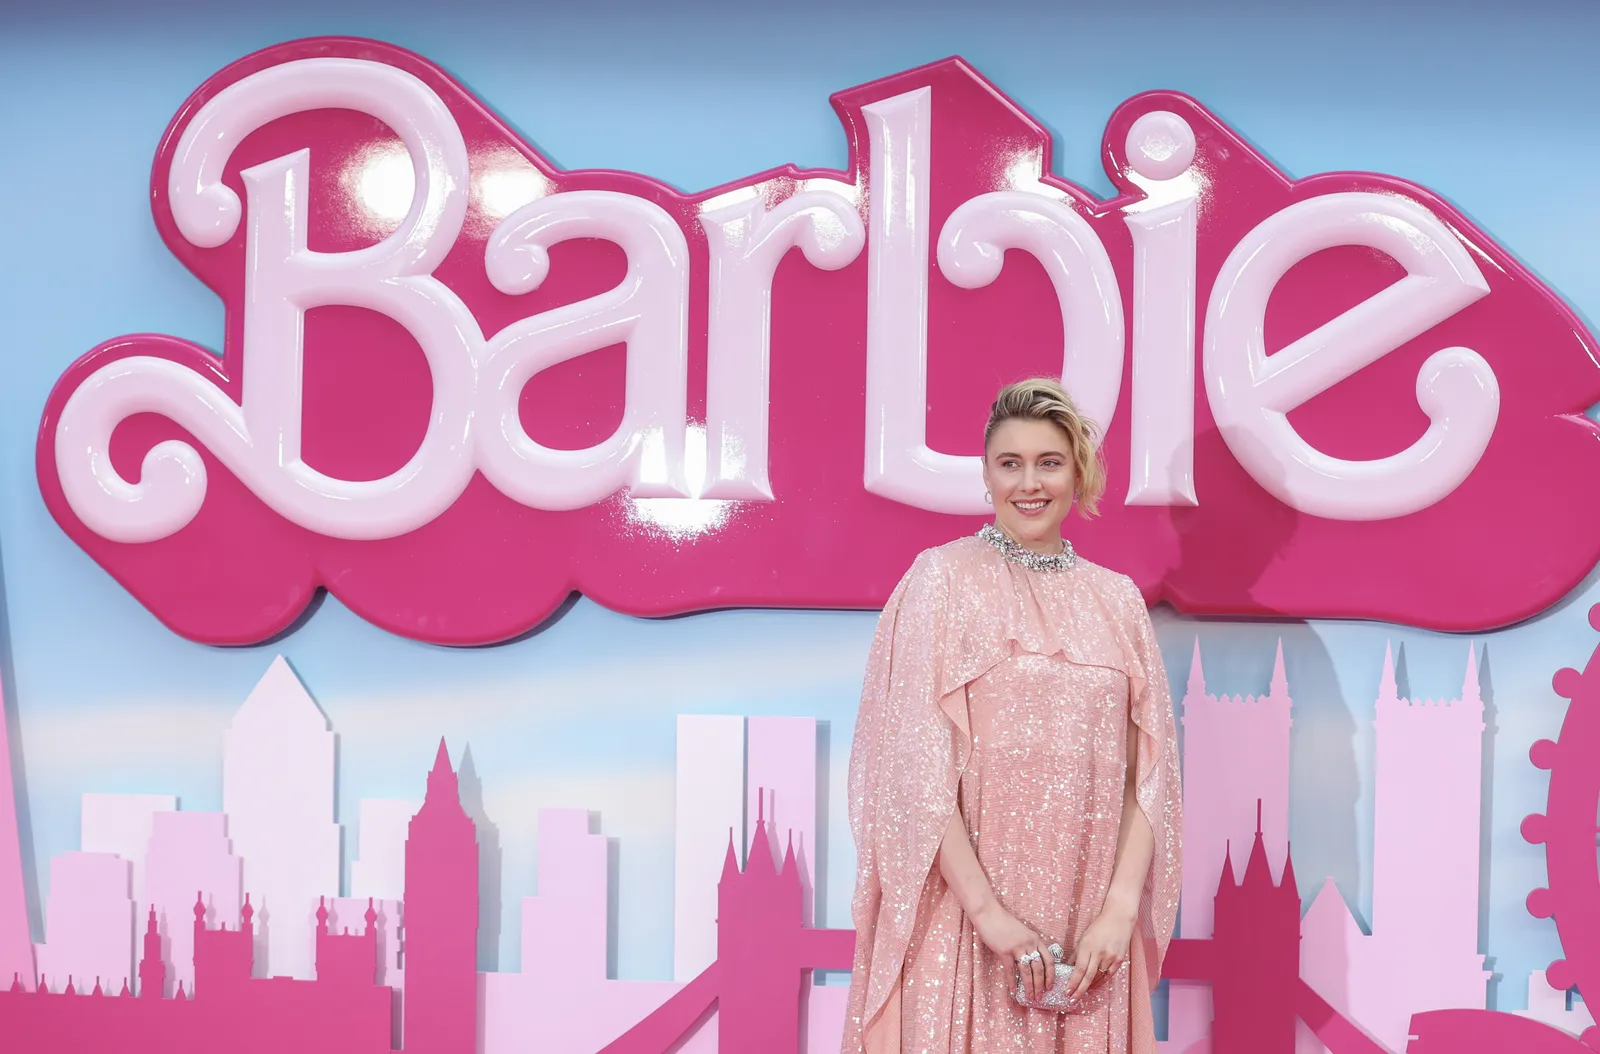 Why Is 'Barbie' Such a Cultural Phenomenon?